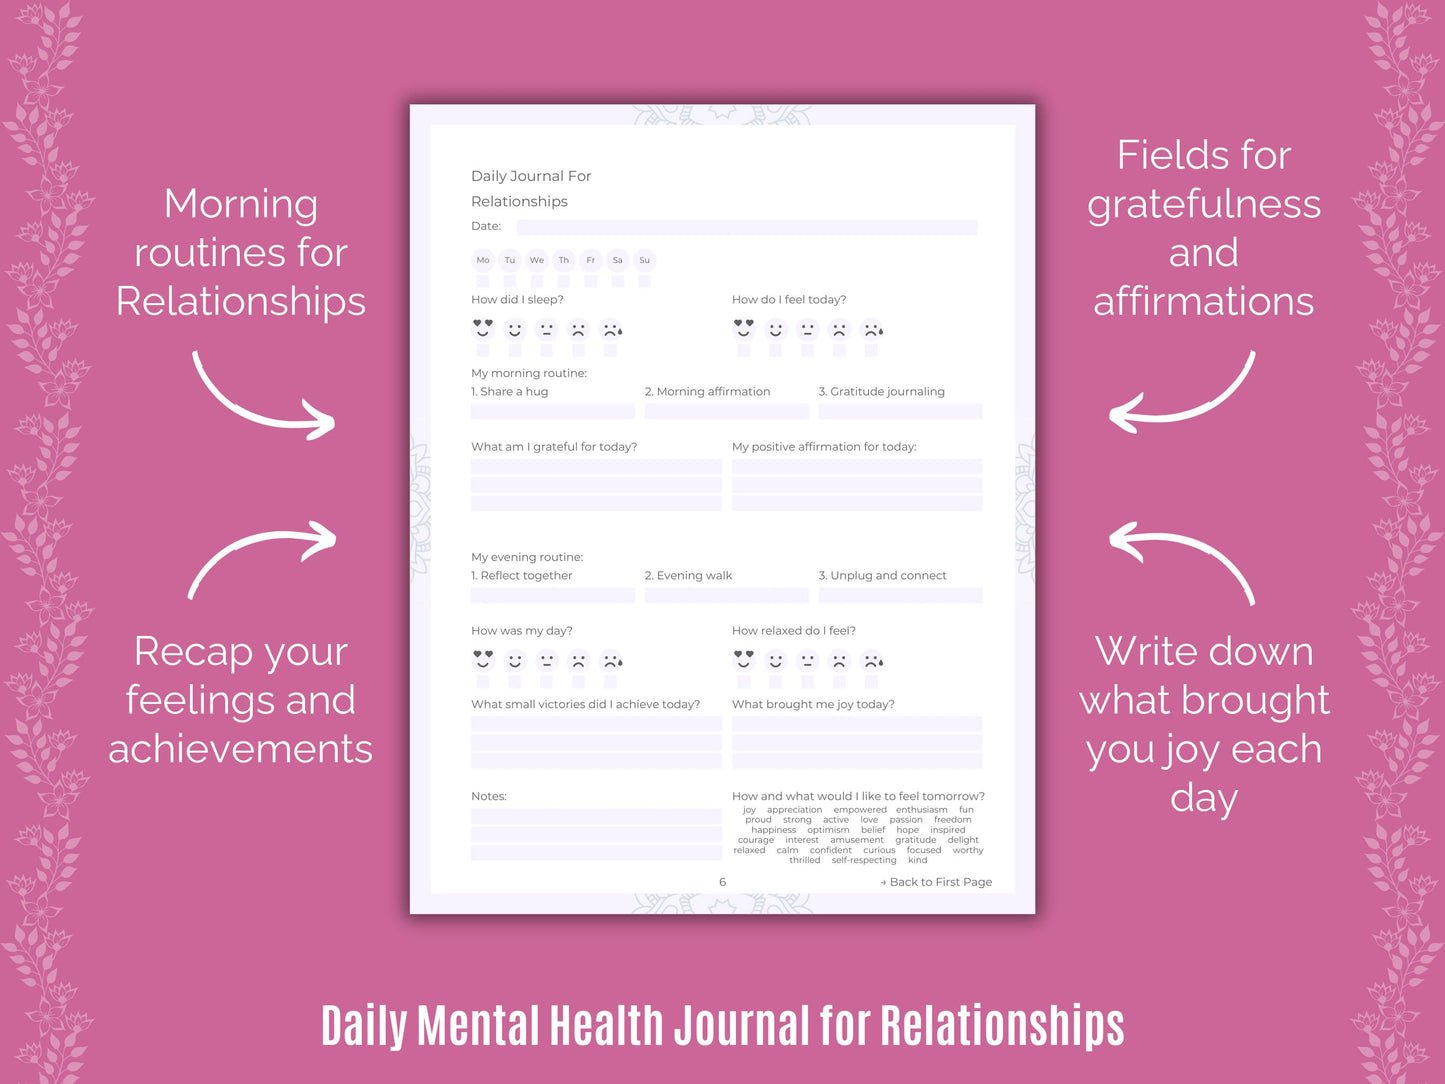 Templates, Relationships Tools, Workbooks, Resources, Relationships Notes, Goal Setting, Planners, Journals, Relationships Mental Health, Journaling, Therapy, Cheat Sheet, Counseling